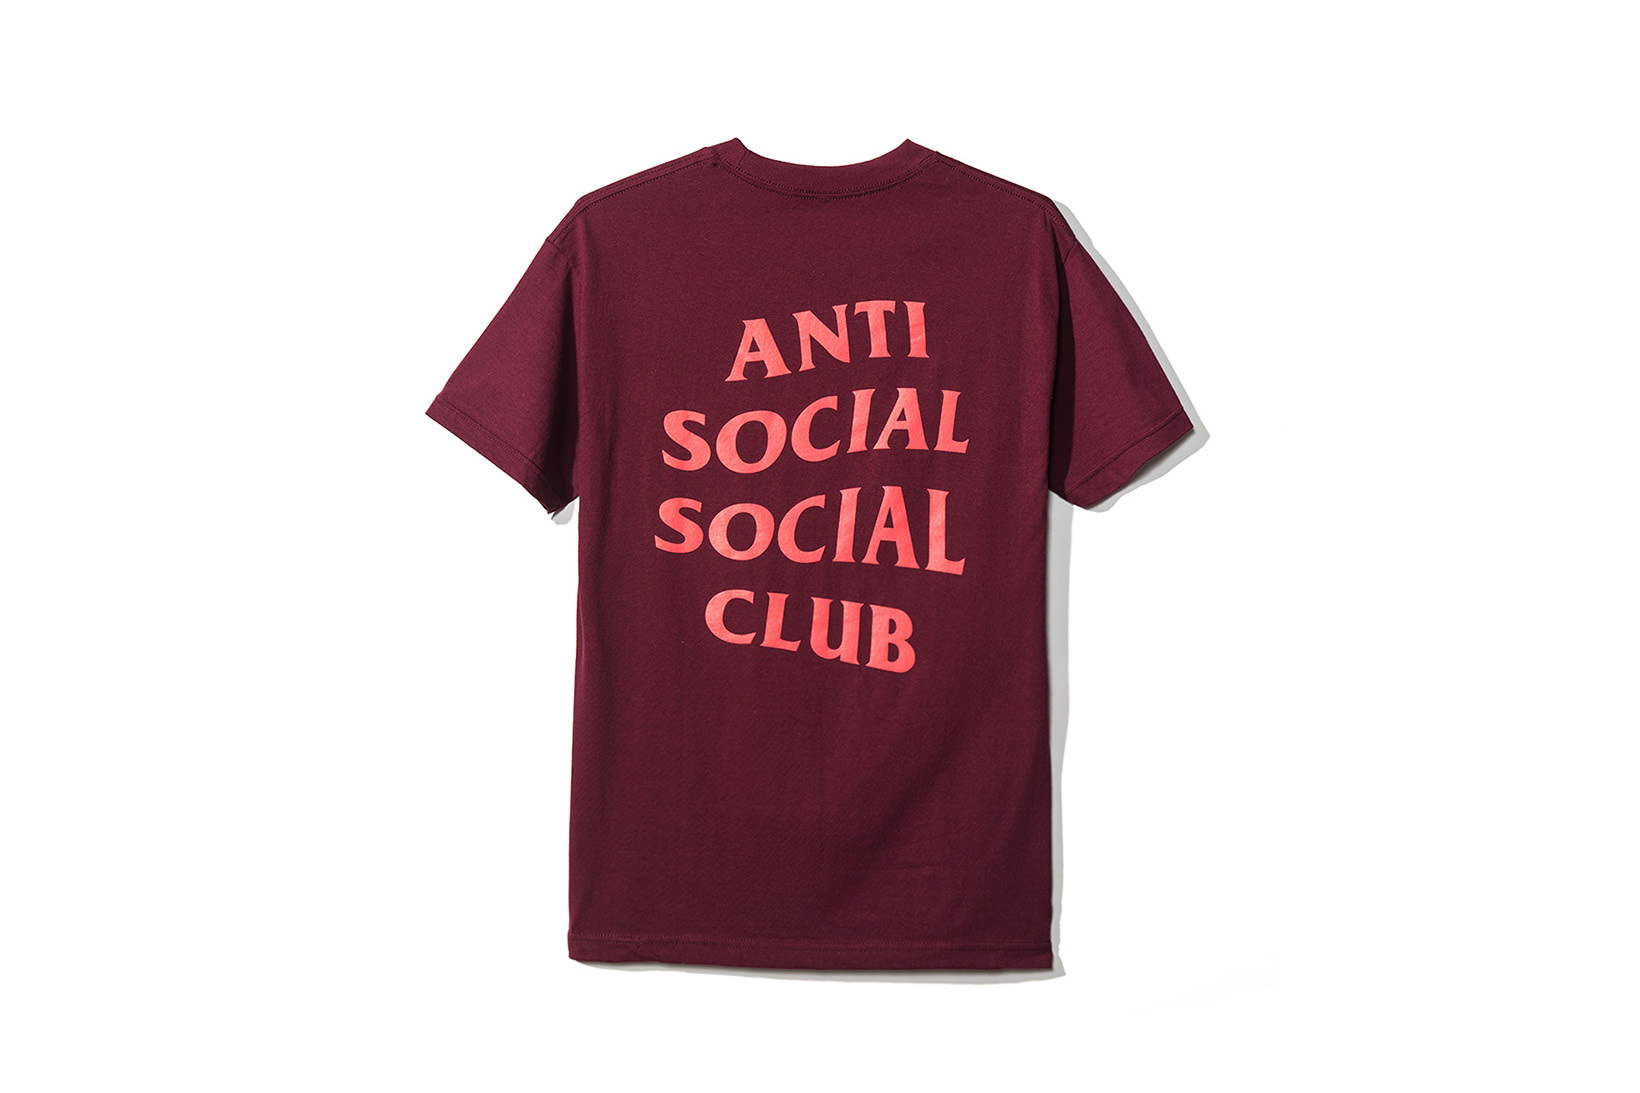 Anti Social Social Club SS17 Collection - Trapped Magazine